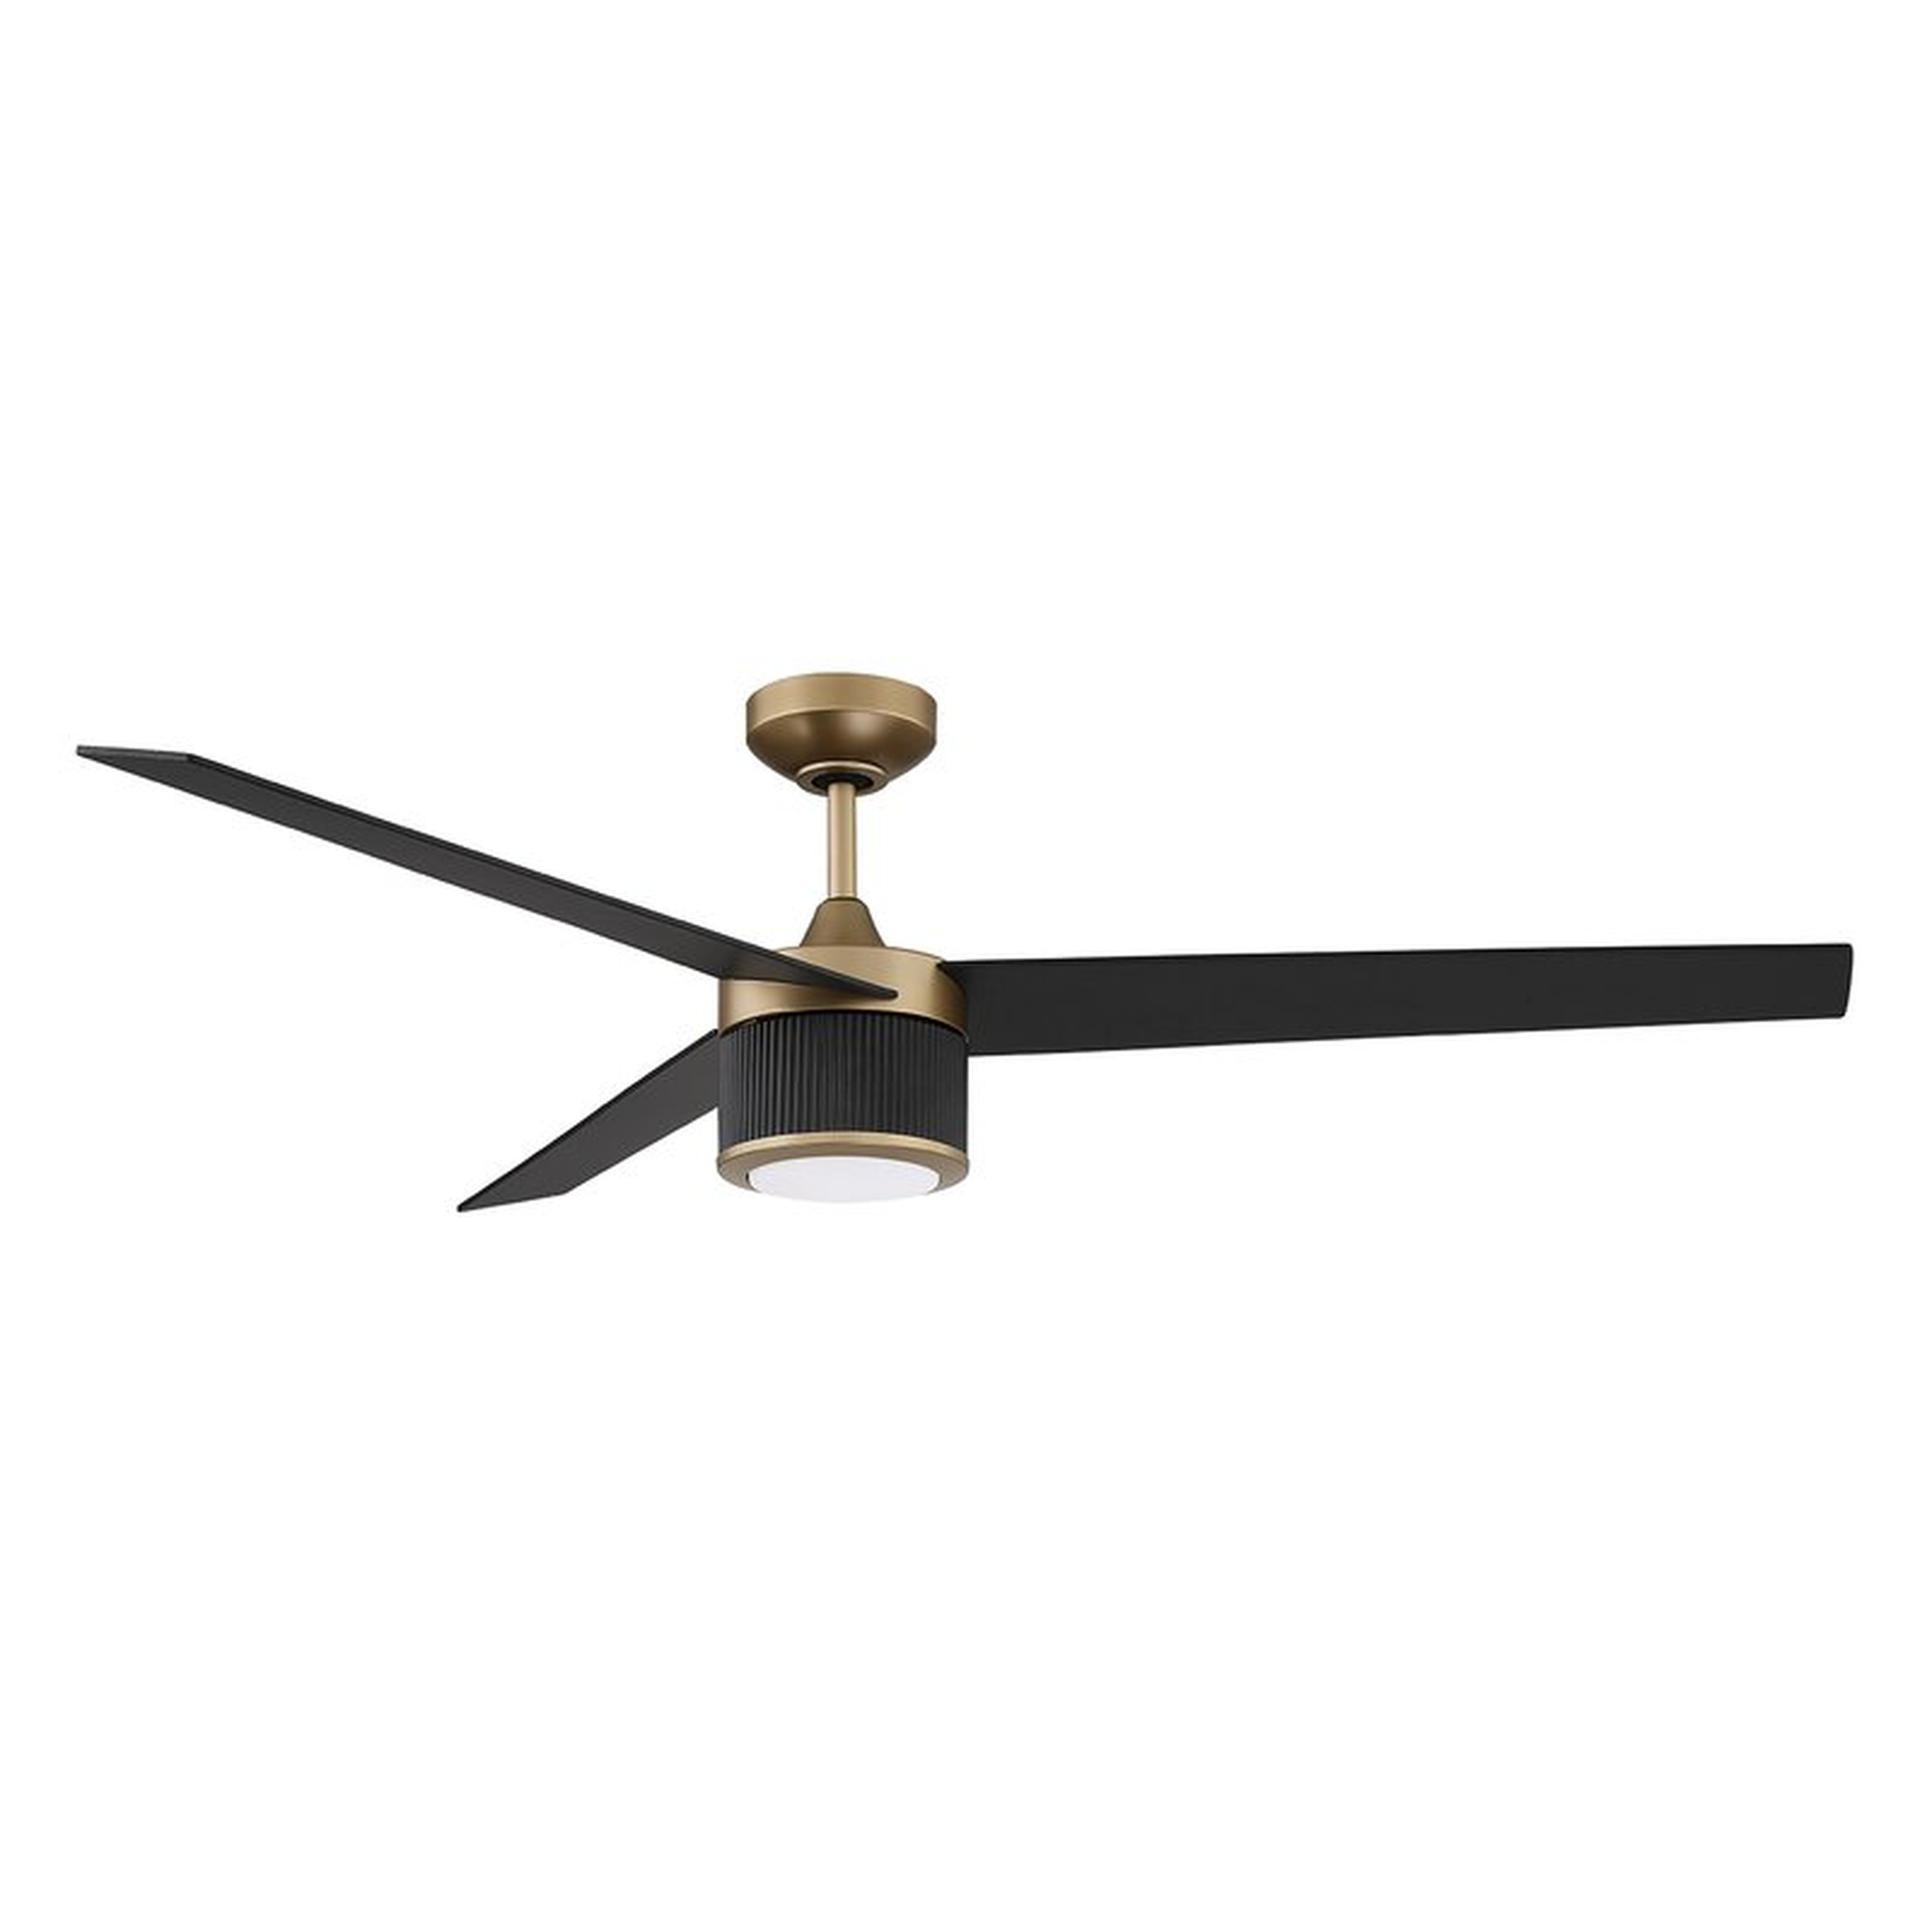 52" Munz 3 - Blade LED Standard Ceiling Fan with Wall Control and Light Kit Included - Wayfair